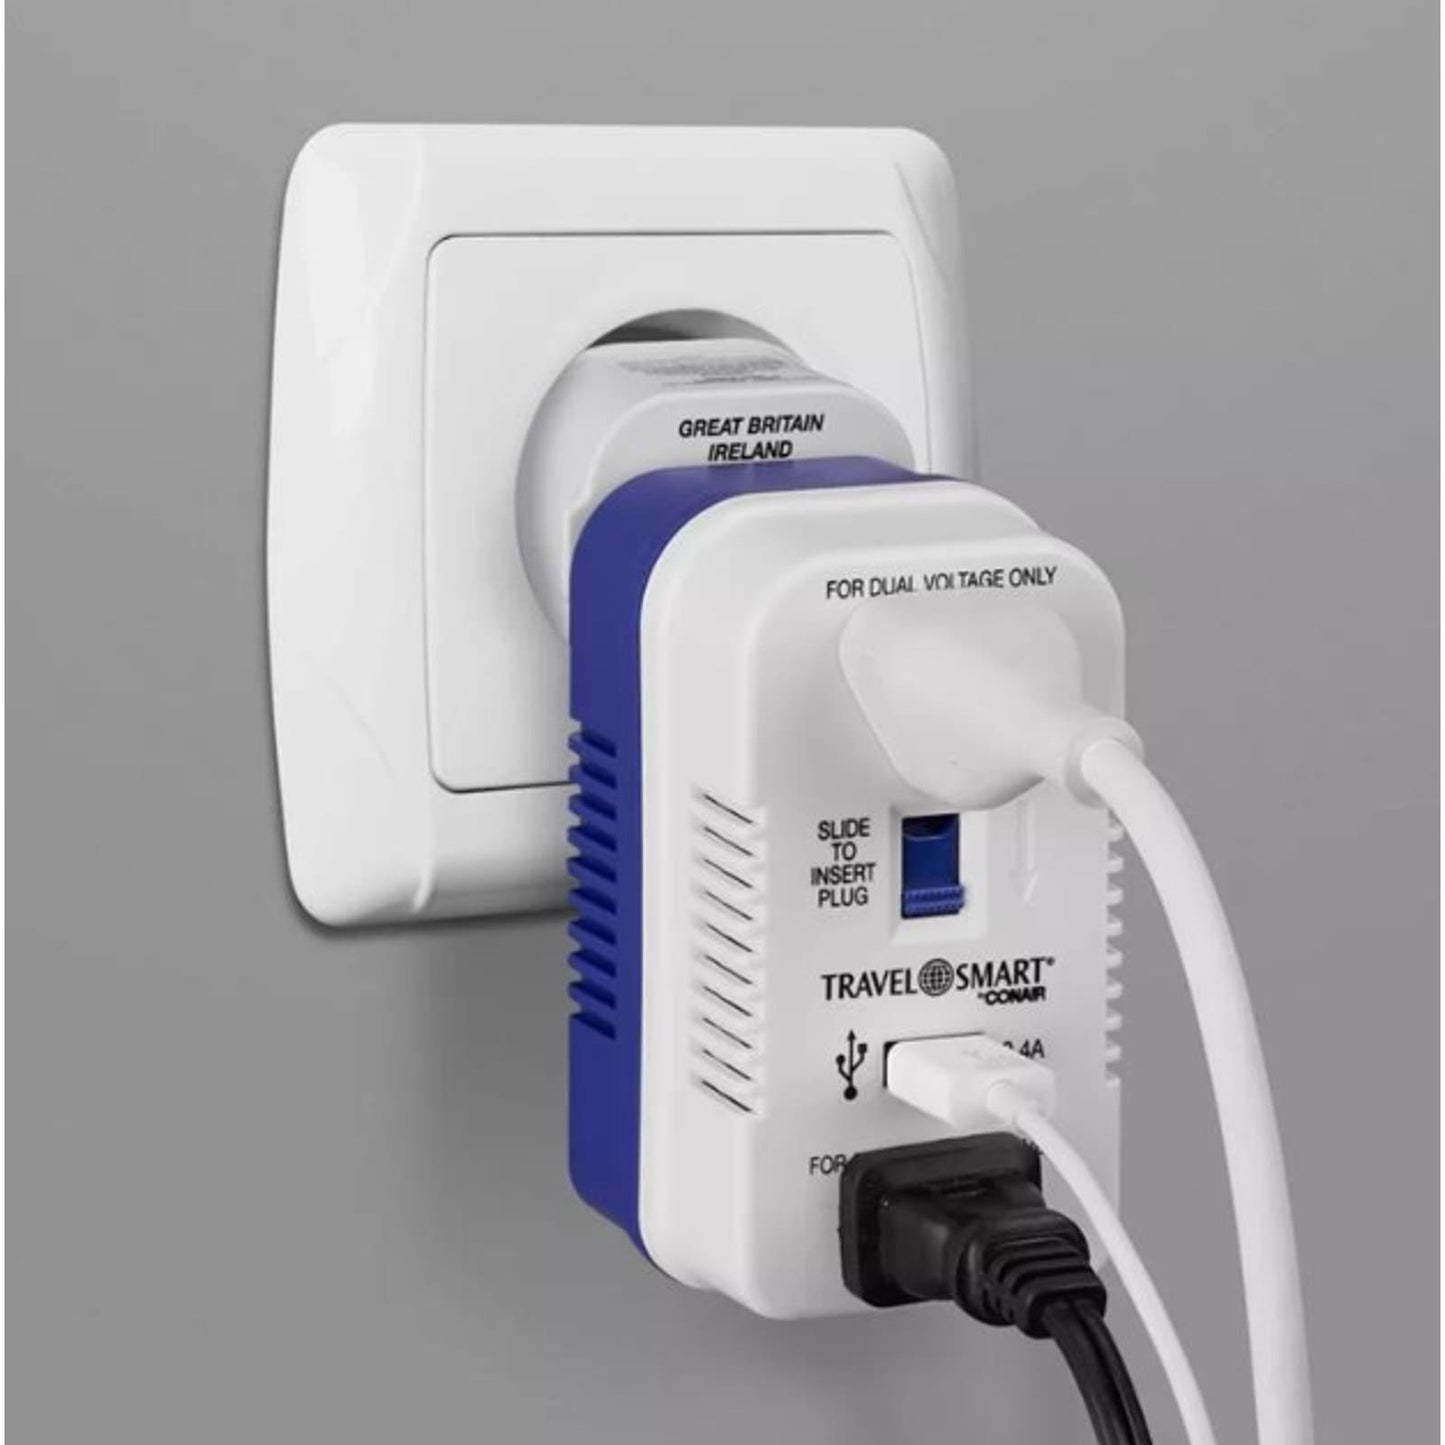 Converter and Worldwide Adapter Set with USB